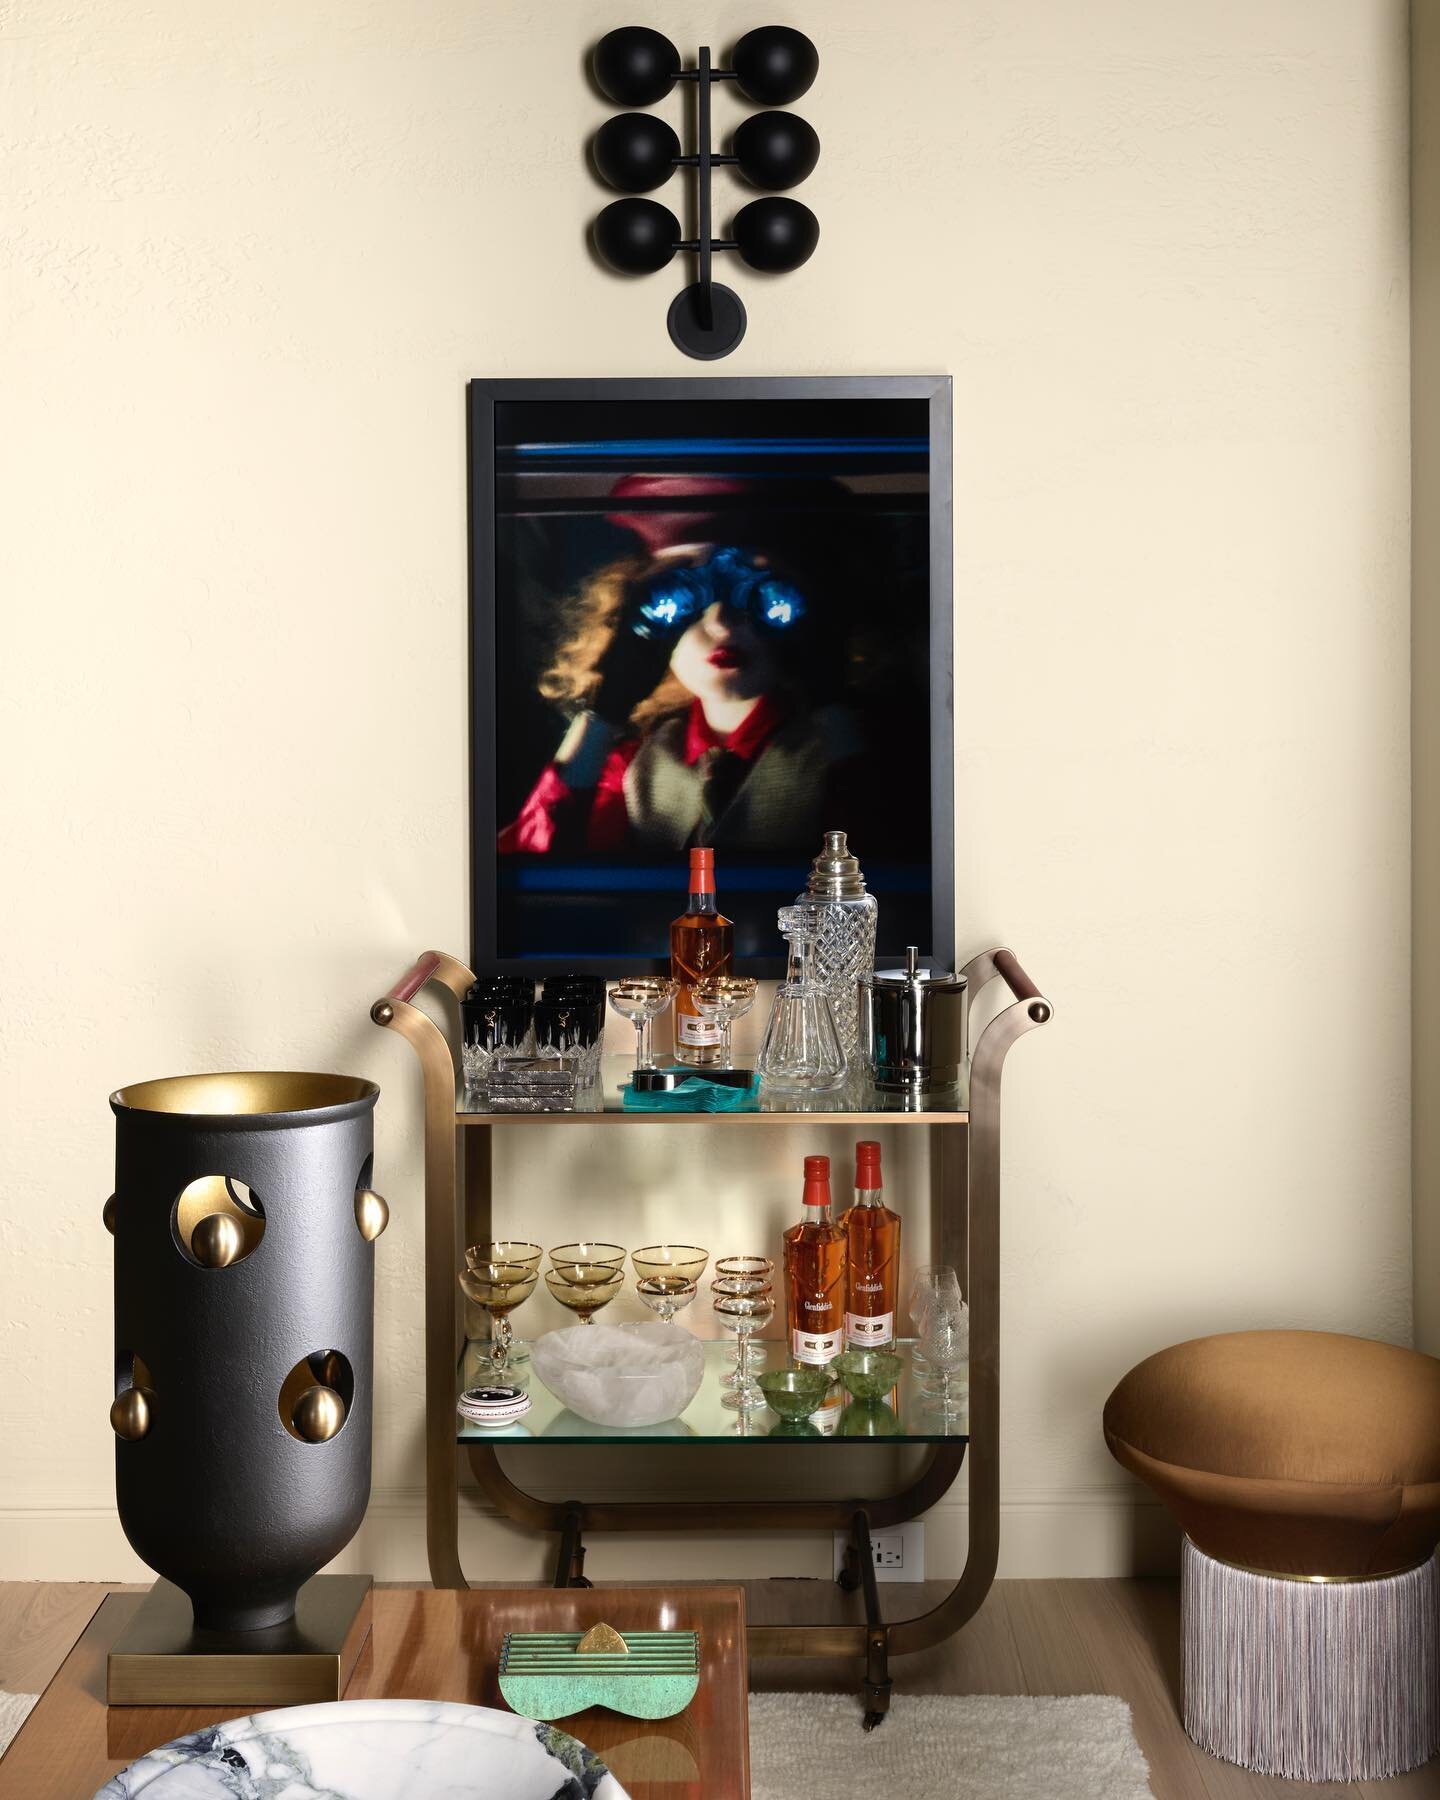 This bar cart by @blackmancruz is to die for! We wanted to say thank you for being part of our Living Room Design at The San Francisco Decorator Showcase House @sfshowcase 
This piece really adds to the space with its Patinated Brass Frame and leathe